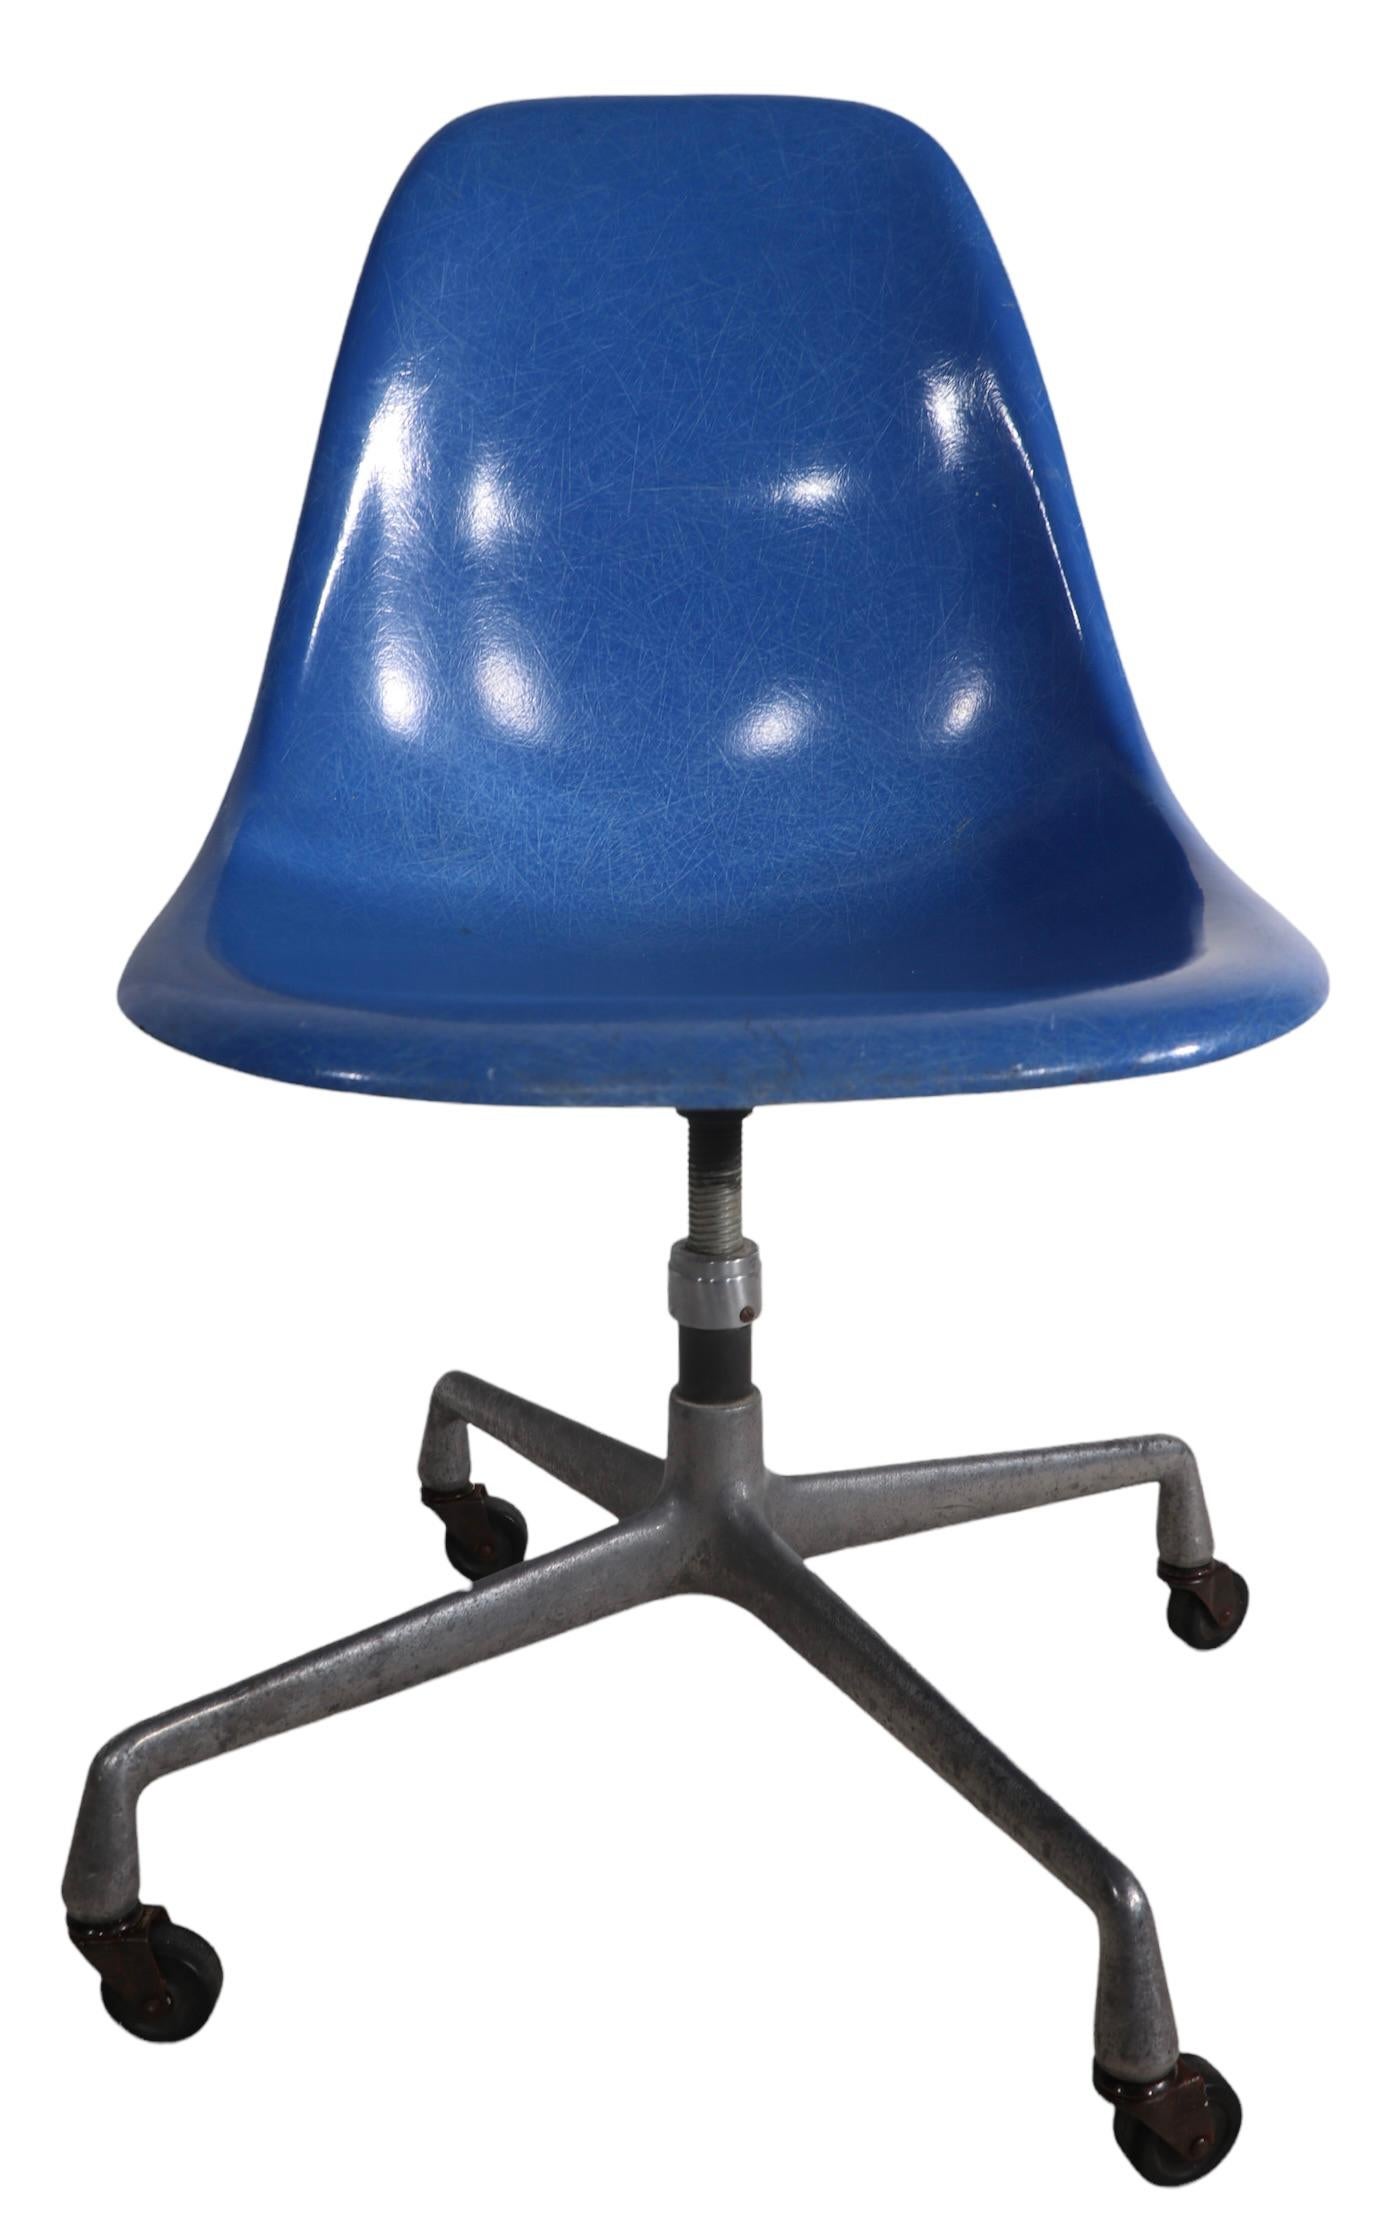 Iconic Eames design, hard to find form, fiberglass shell in blue, on cast aluminum base. This chair swivels, it is adjustable in height, and the base is on wheels, to make this a very flexible and functional chair, in addition to the obvious style